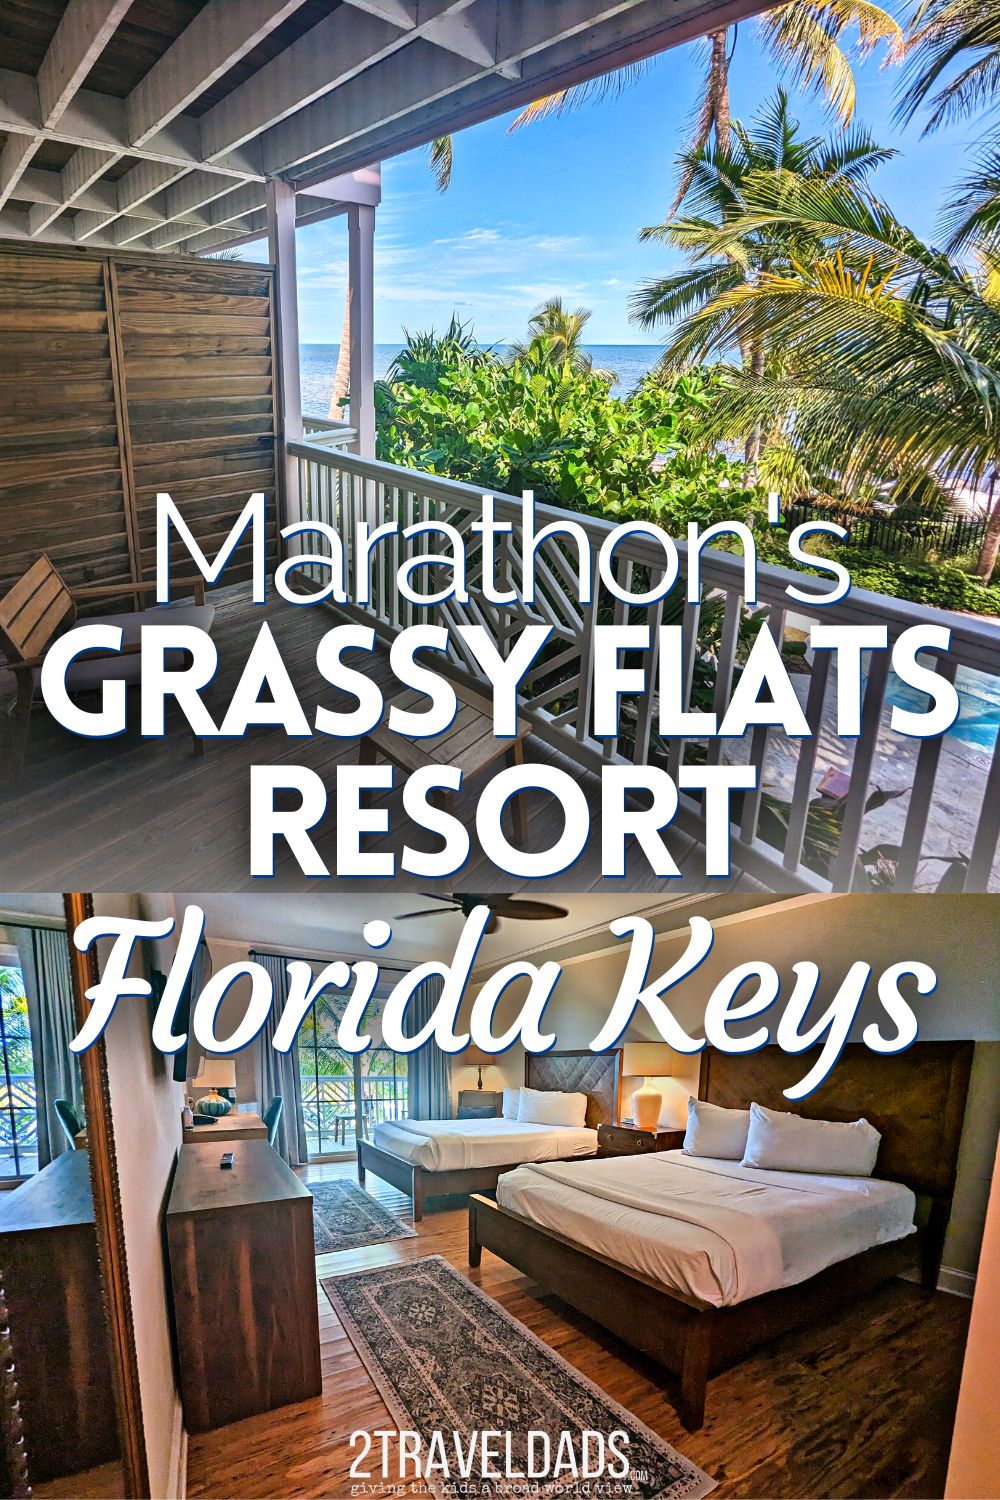 The Grassy Flats Resort and Beach Club on Marathon is one of the most mellow places we've stayed in the Florida Keys. From room options to on-property activities and watersport gear, we've got the details of staying at the Grassy Flats Resort.